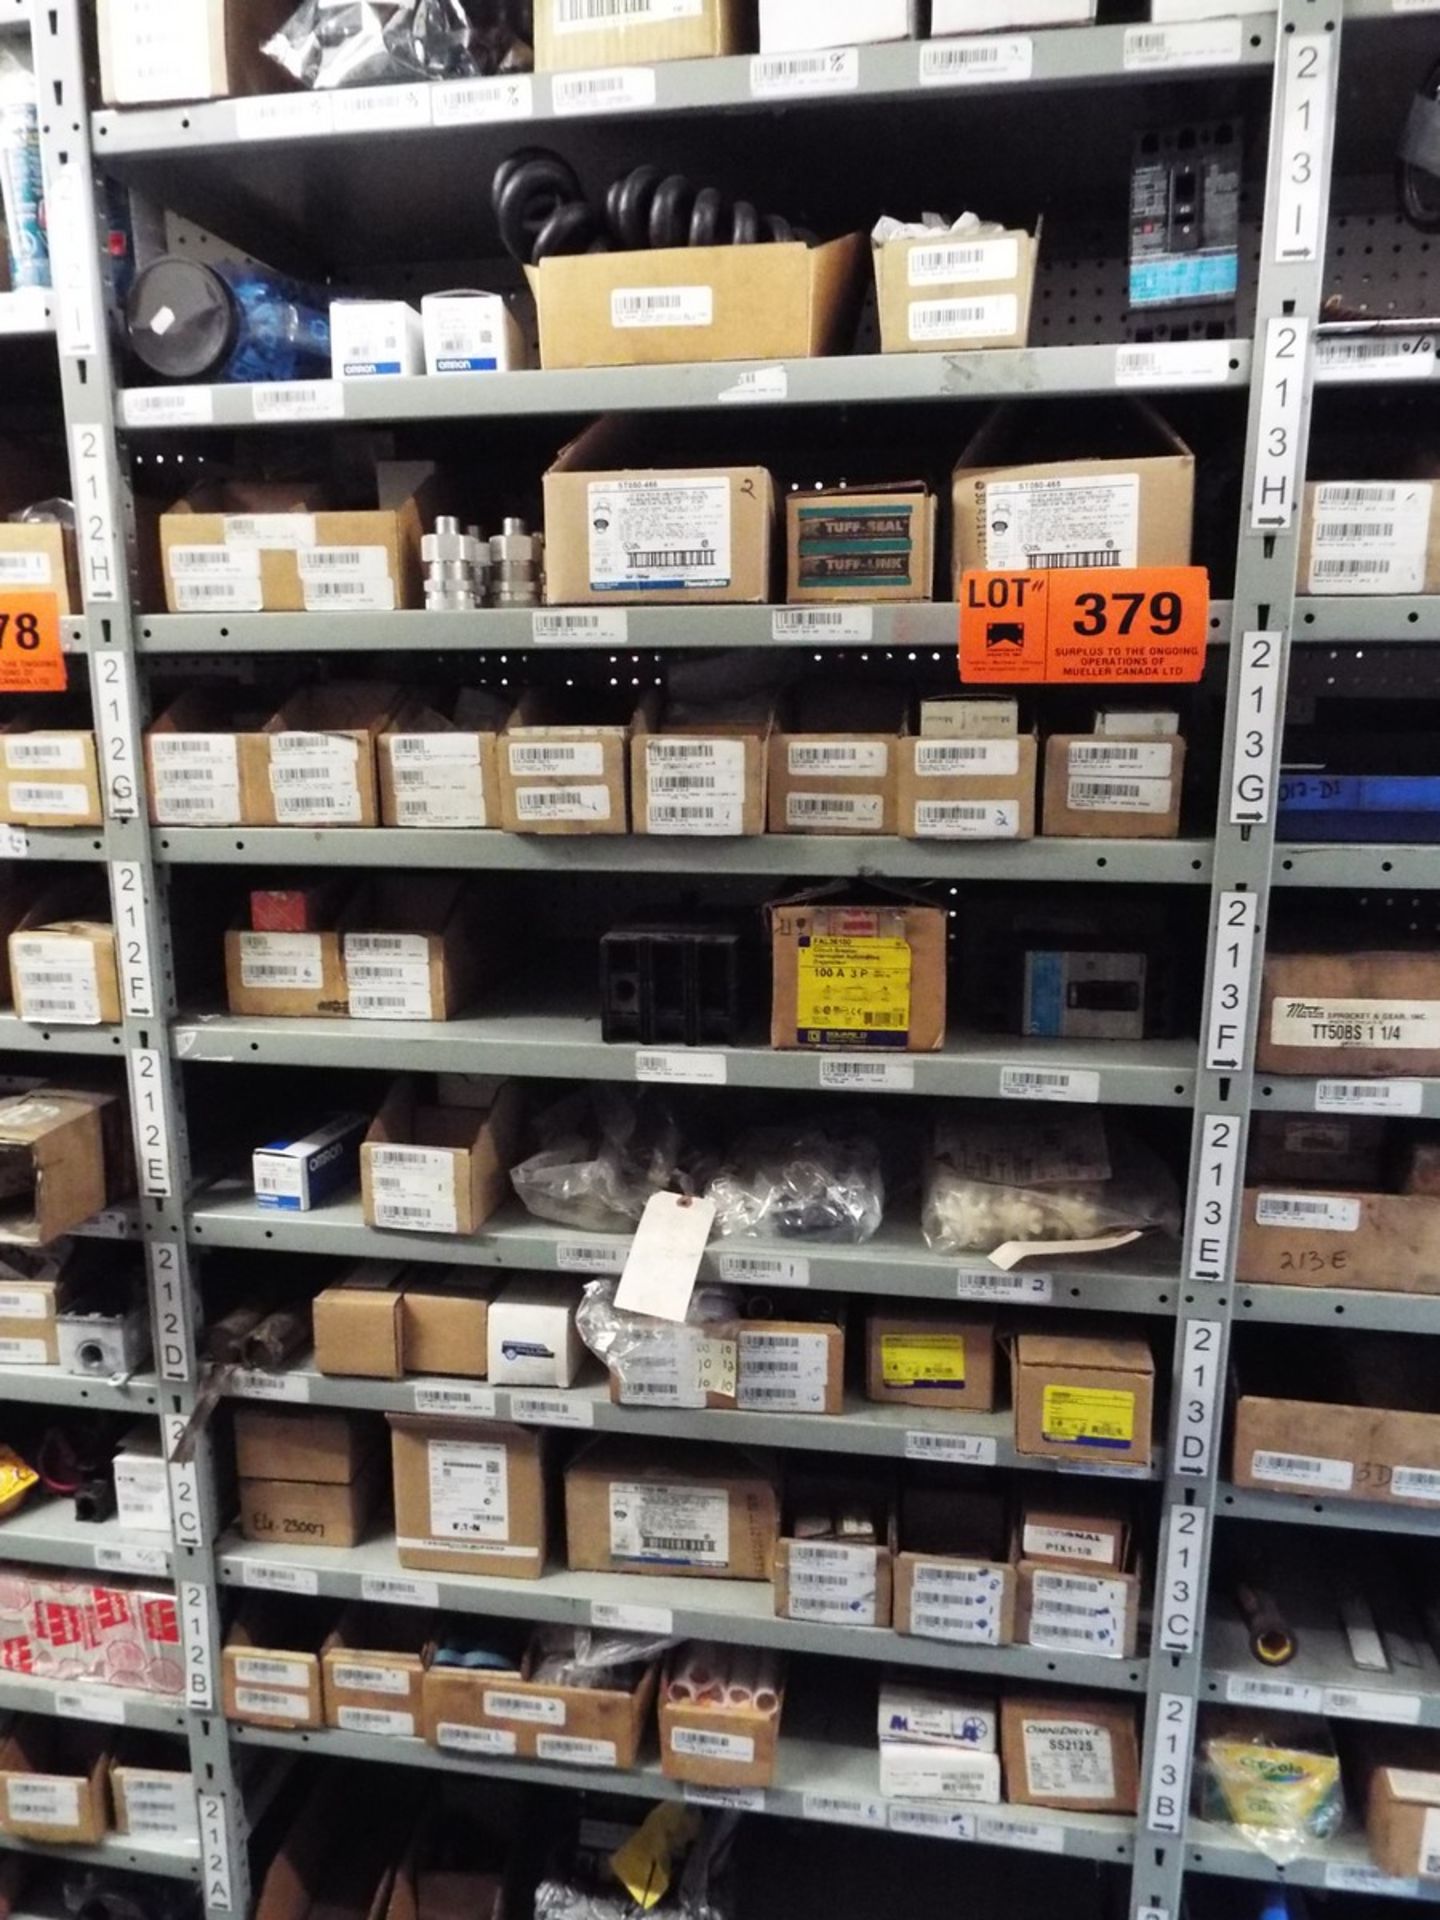 LOT/ CONTENTS OF SHELF - ELECTRICAL AND MECHANICAL SPARE PARTS